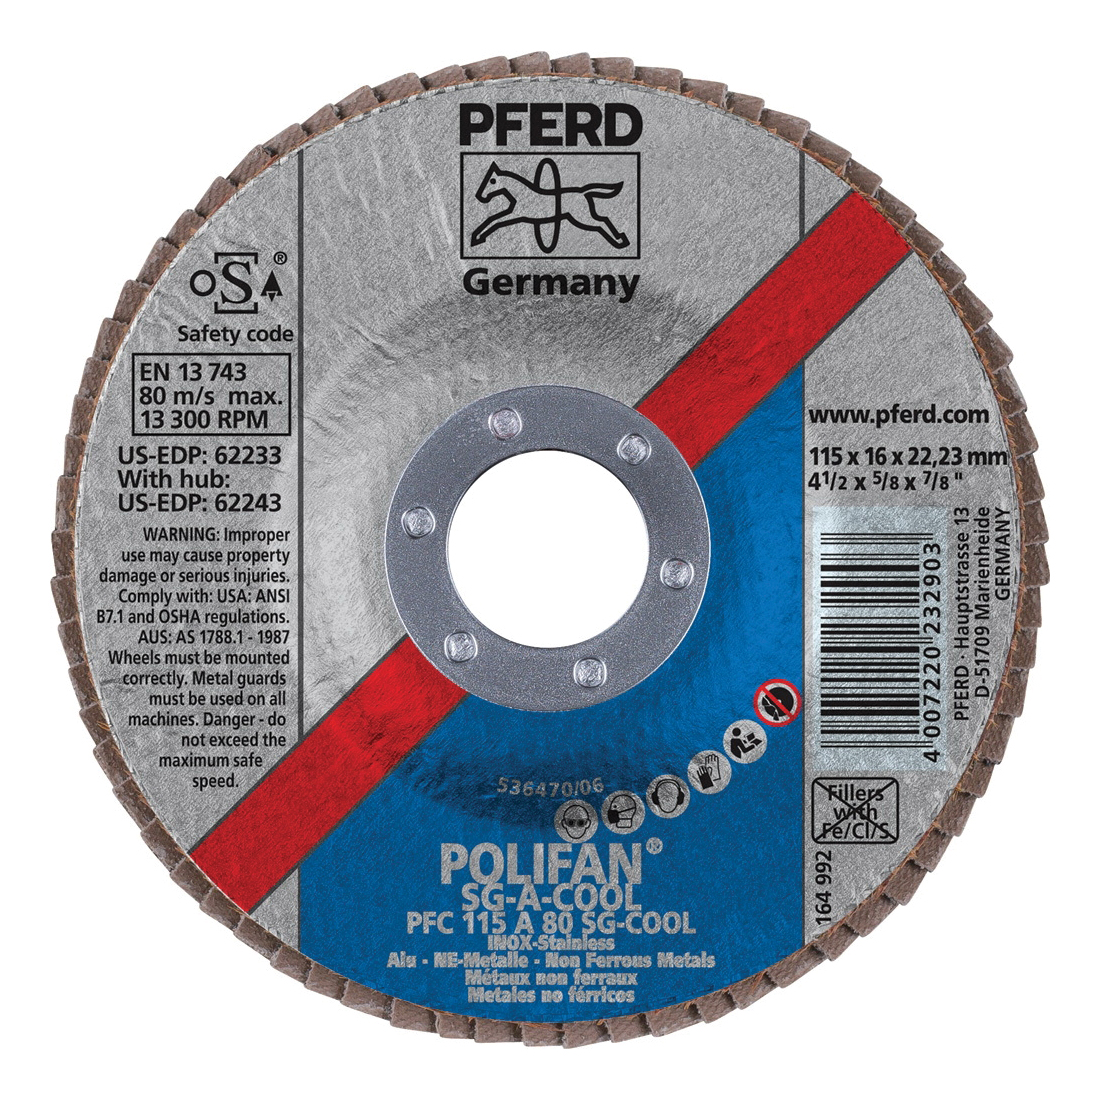 PFERD Polifan® 62233 Performance Line SG A-COOL Unthreaded Coated Abrasive Flap Disc, 4-1/2 in Dia, 7/8 in Center Hole, 80 Grit, Aluminum Oxide Abrasive, Type 29 Conical Disc